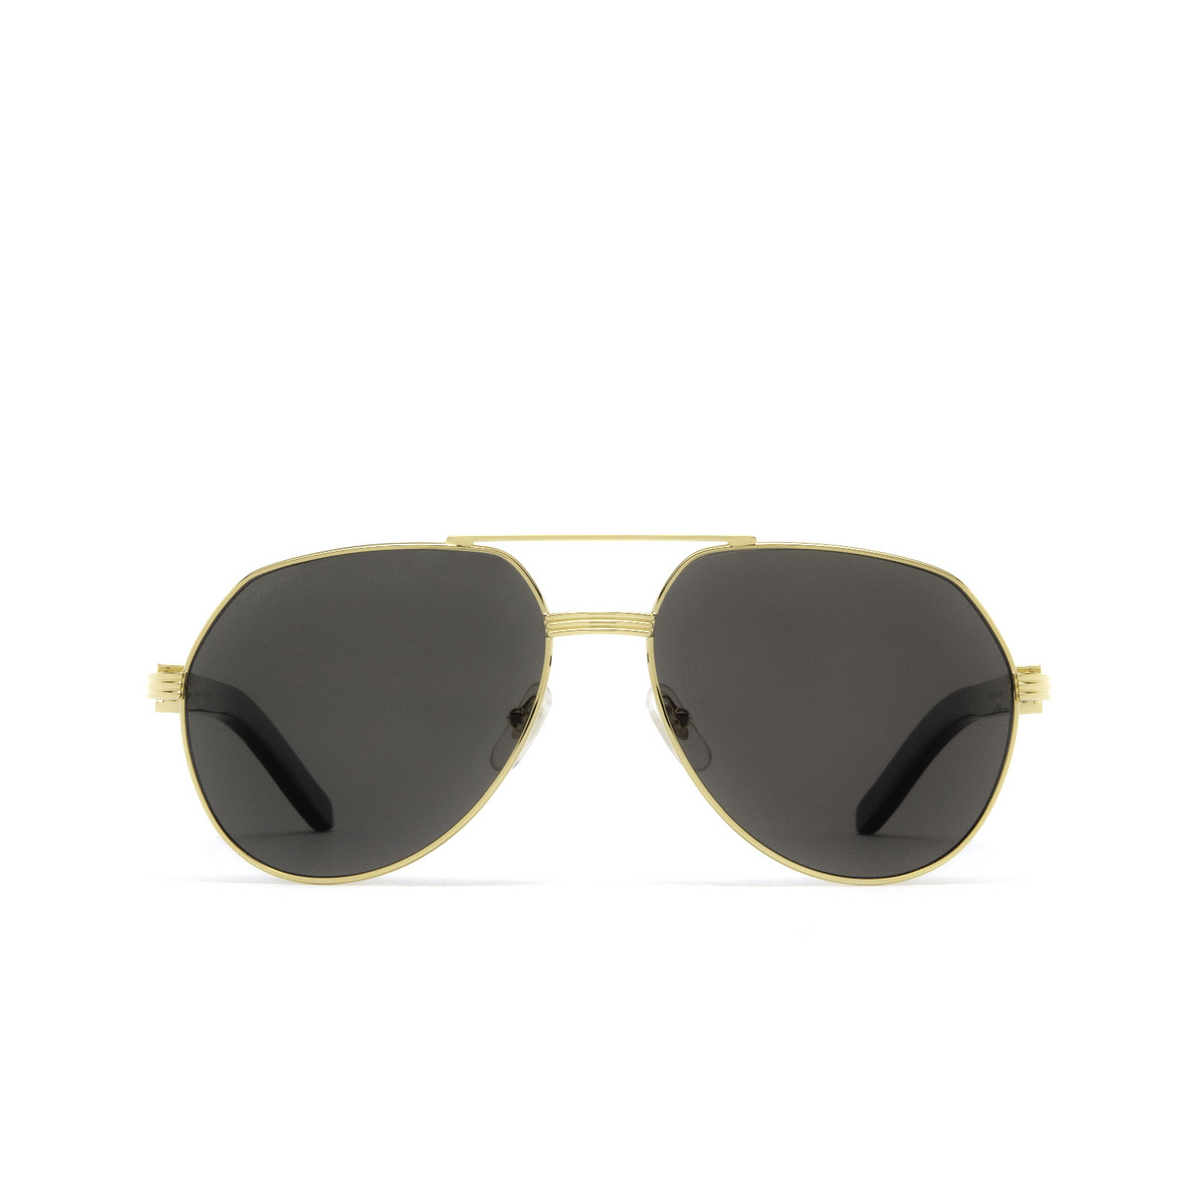 Cartier® Aviator Sunglasses: CT0272S color Gold 001 - front view.